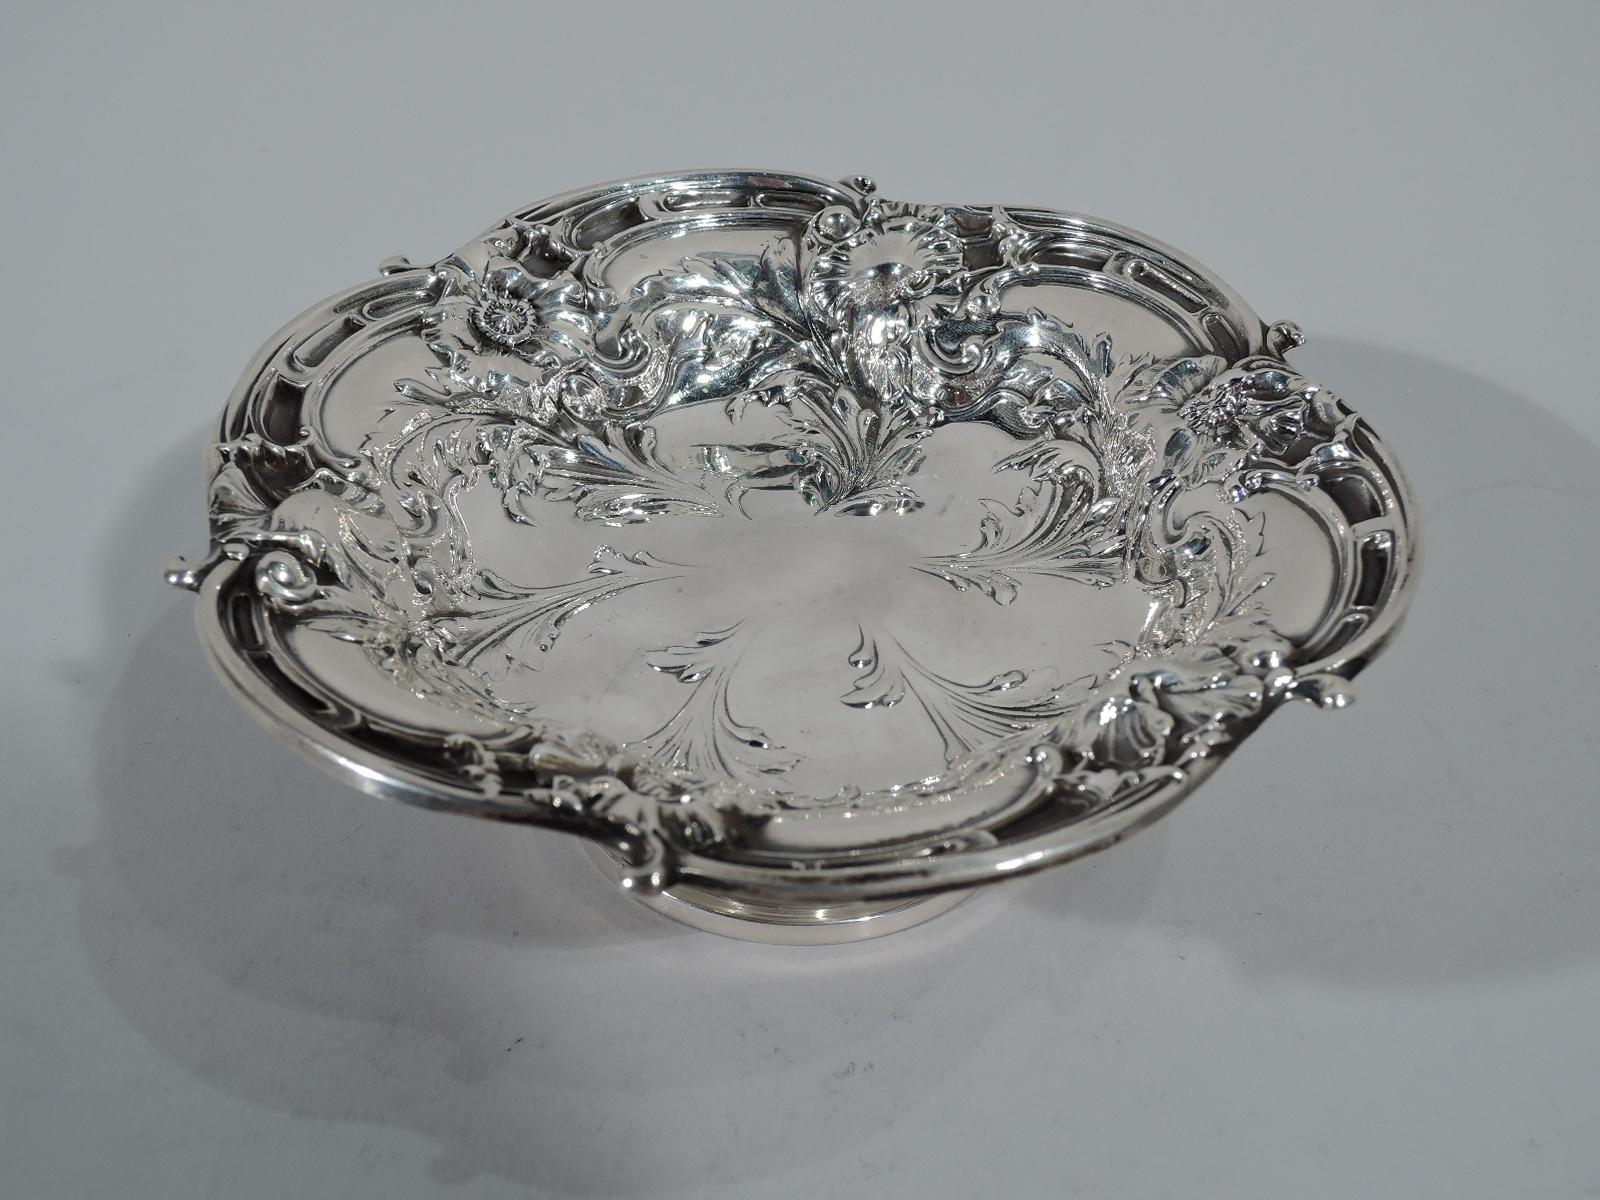 Pretty Art Nouveau sterling silver footed bowl. Made by Reed & Barton in Taunton, Mass. in 1949. Shallow and lobed bowl on domed foot. Bowl interior has chased wildflowers and foliage. Hallmark includes date symbol and no. X279. Weight: 4.6 troy